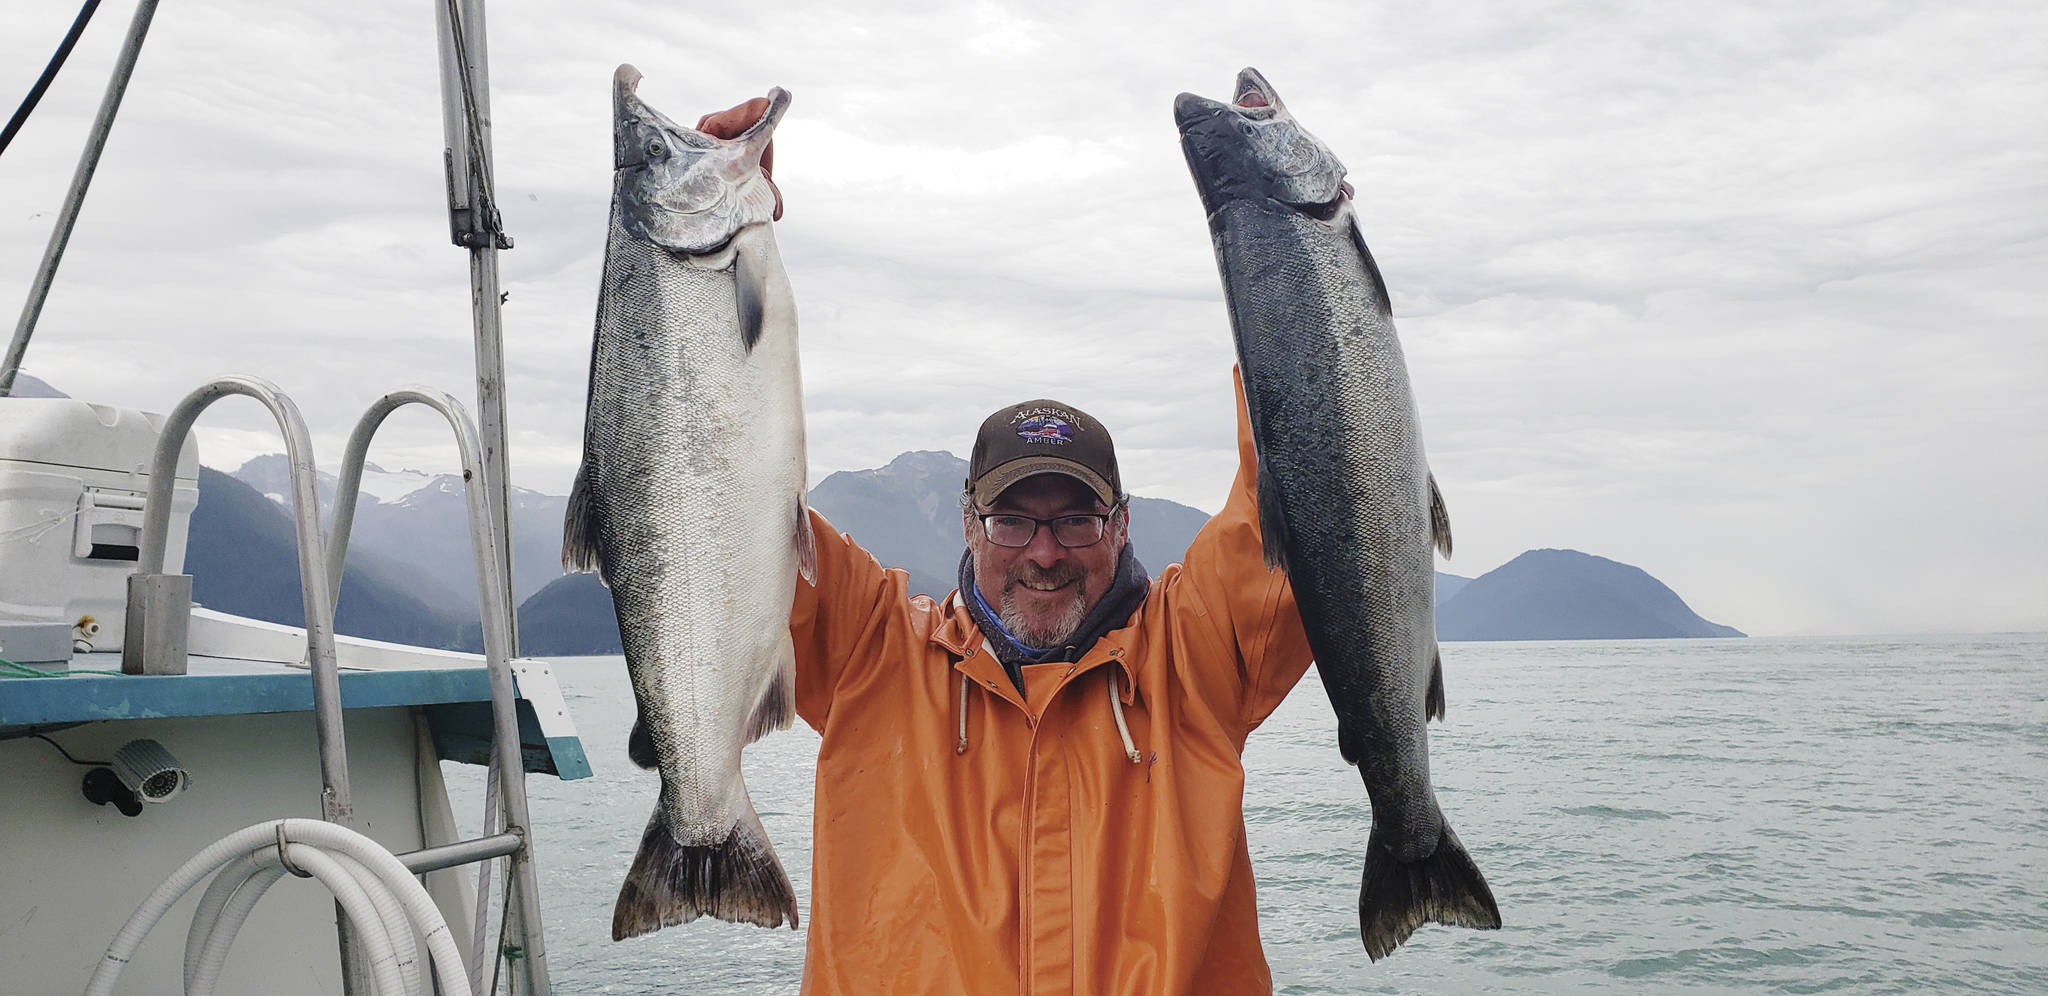 Courtesy Photo / Holly A. Heyser
Hank Shaw holds coho salmon caught on the Taku River. Shaw, a hunter, angler, gardener, chef and award-winning writer, is in town this week to promote his new book “Hook, Line, and Supper.”